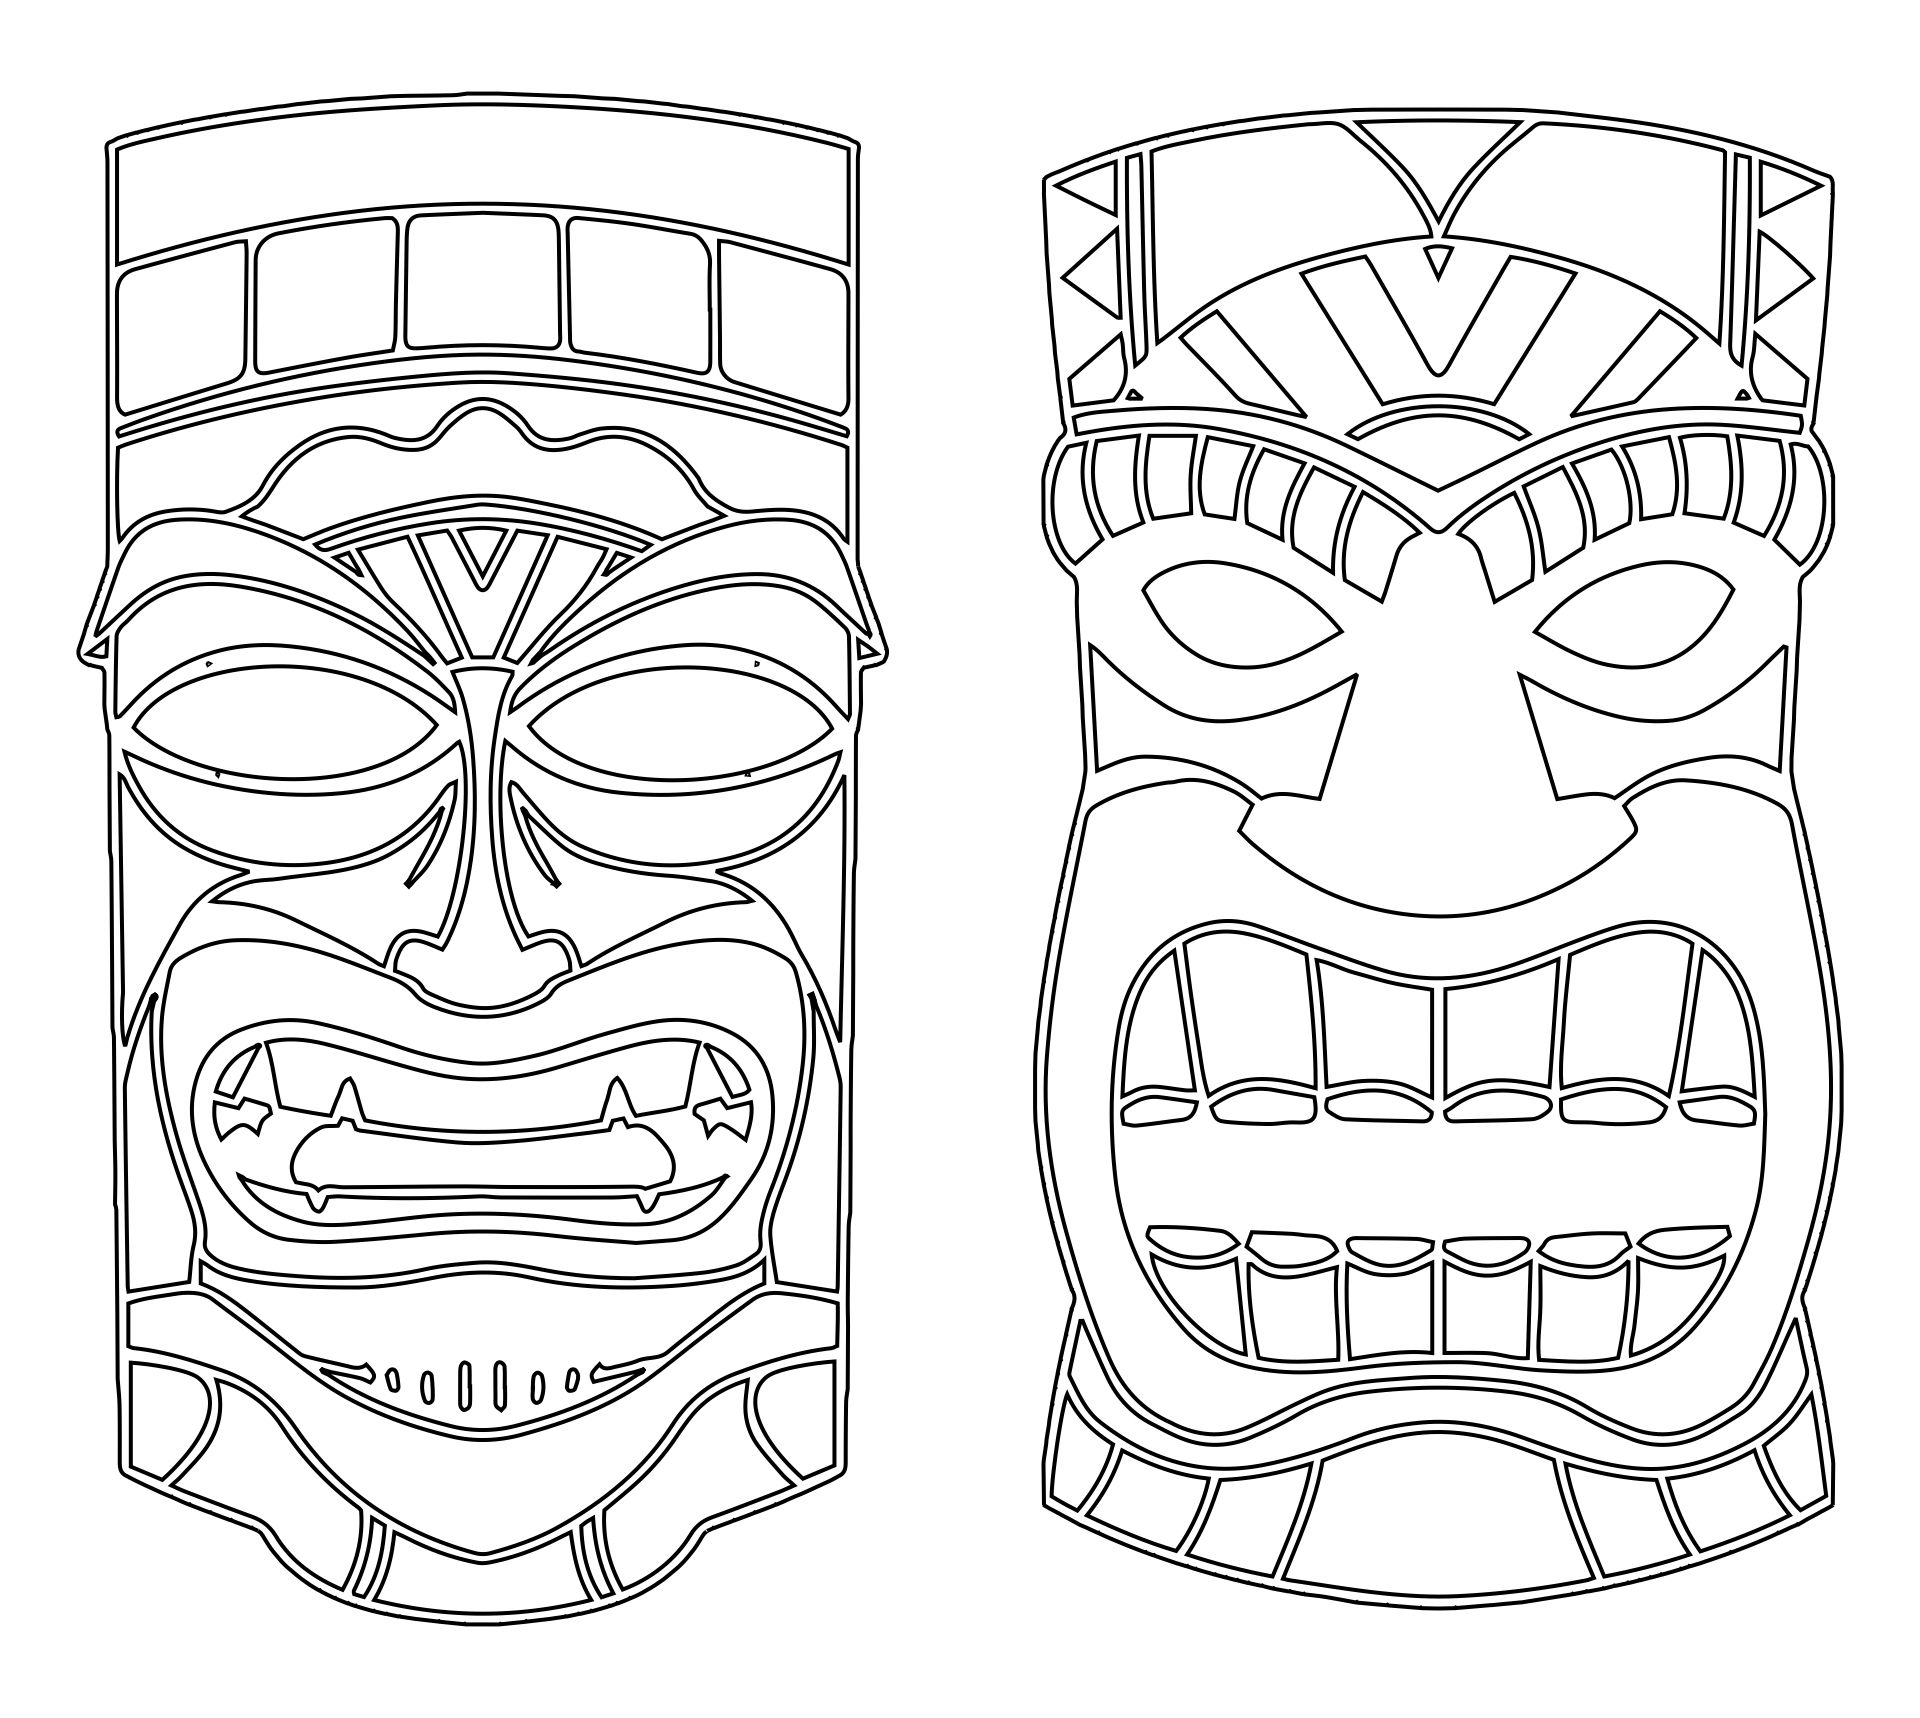 10-best-printable-totem-pole-templates-pdf-for-free-at-printablee